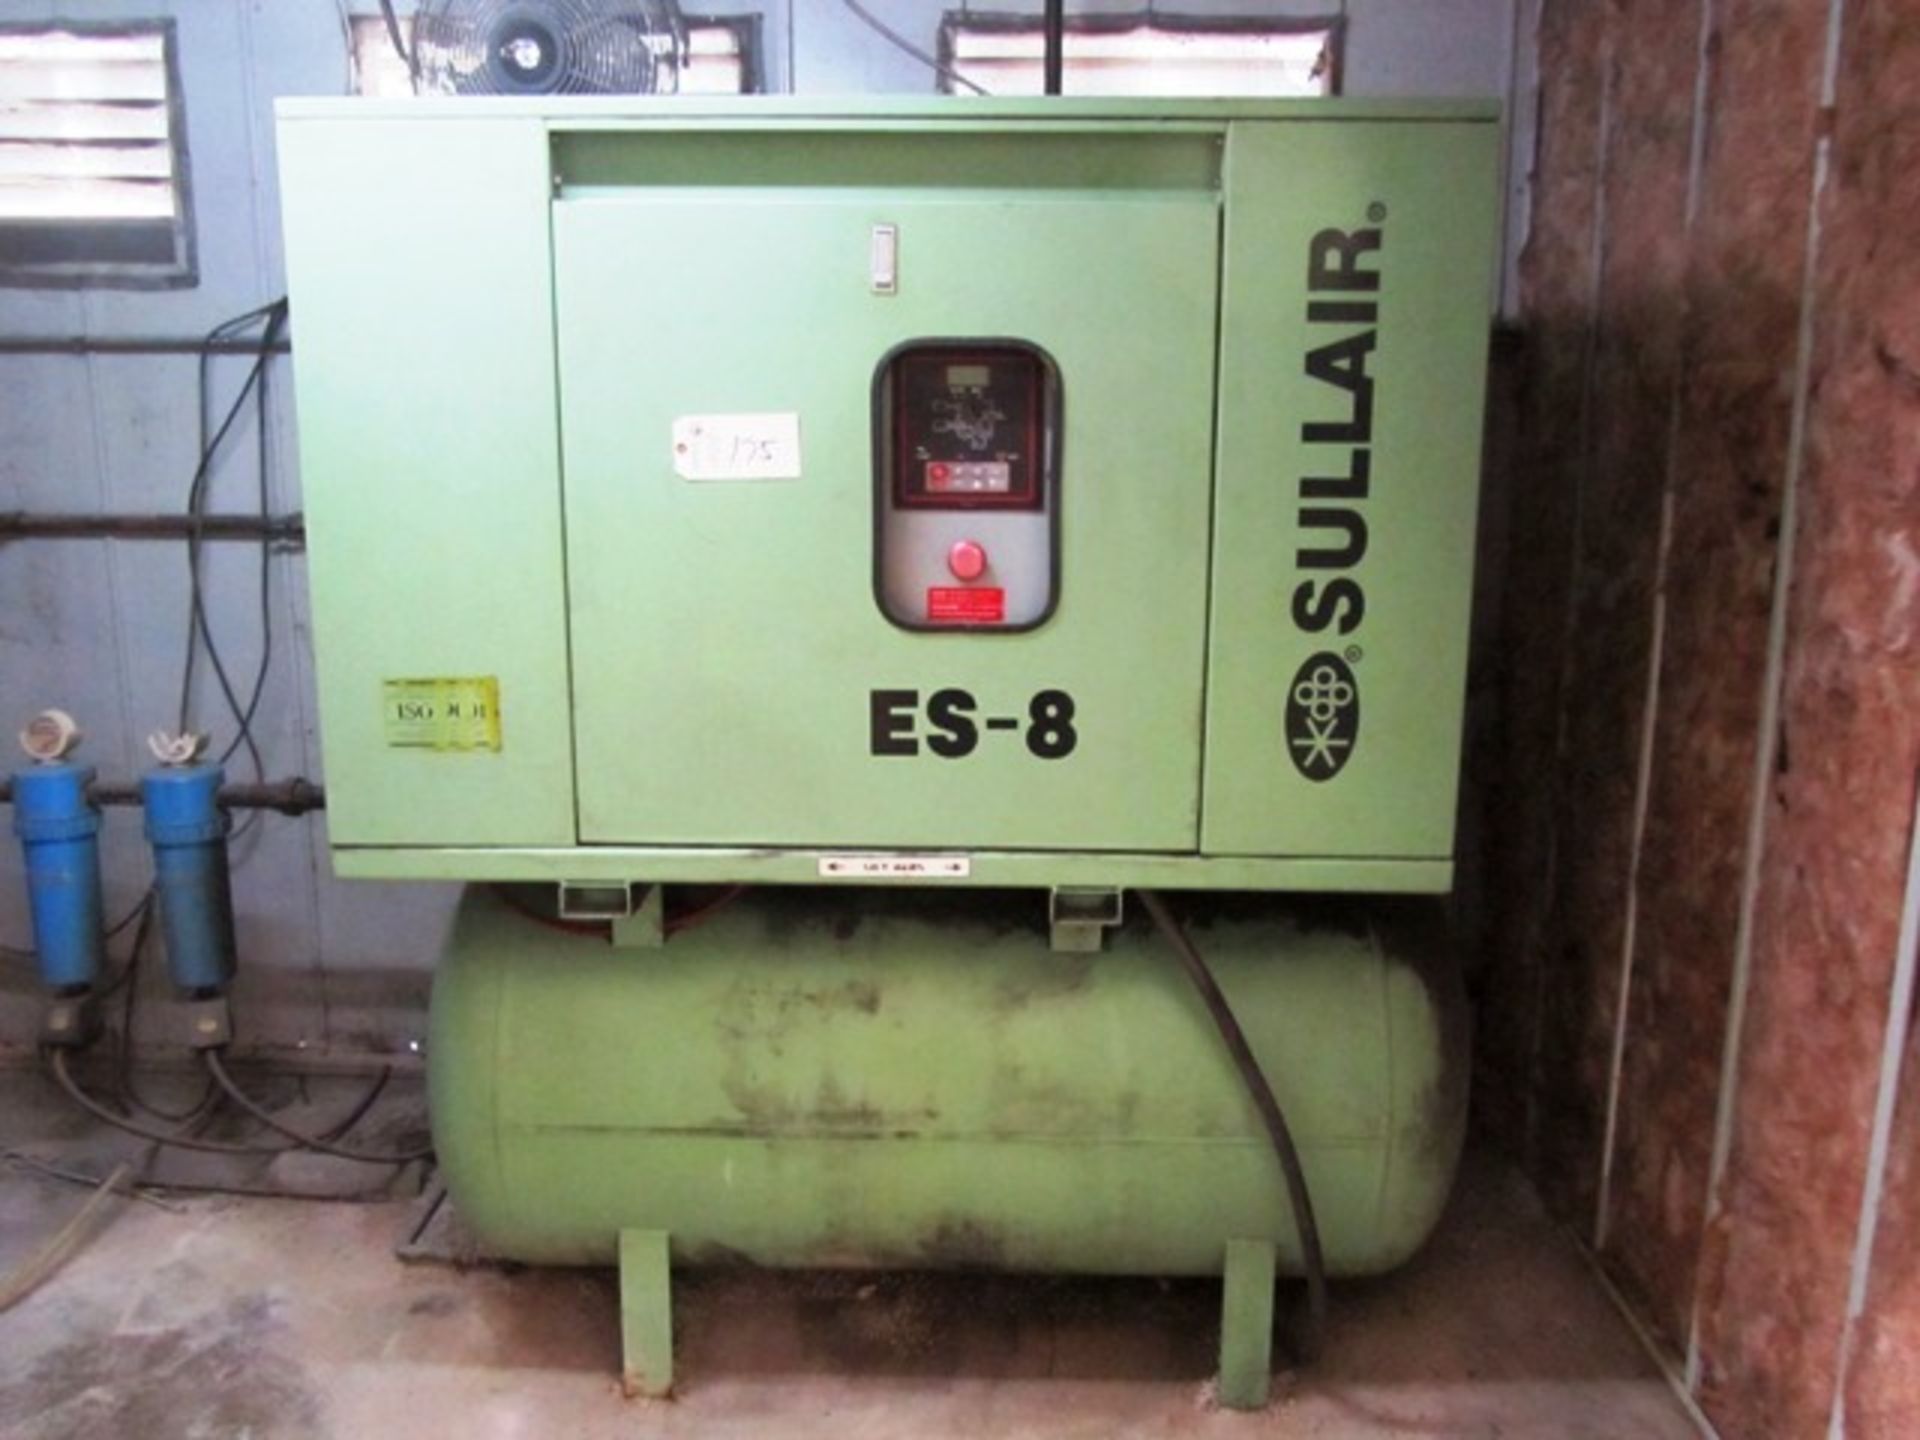 Sullair ES-8 30 HP Rotary Screw Air Compressor with Digital Controls, Holding Tank, sn:003126696